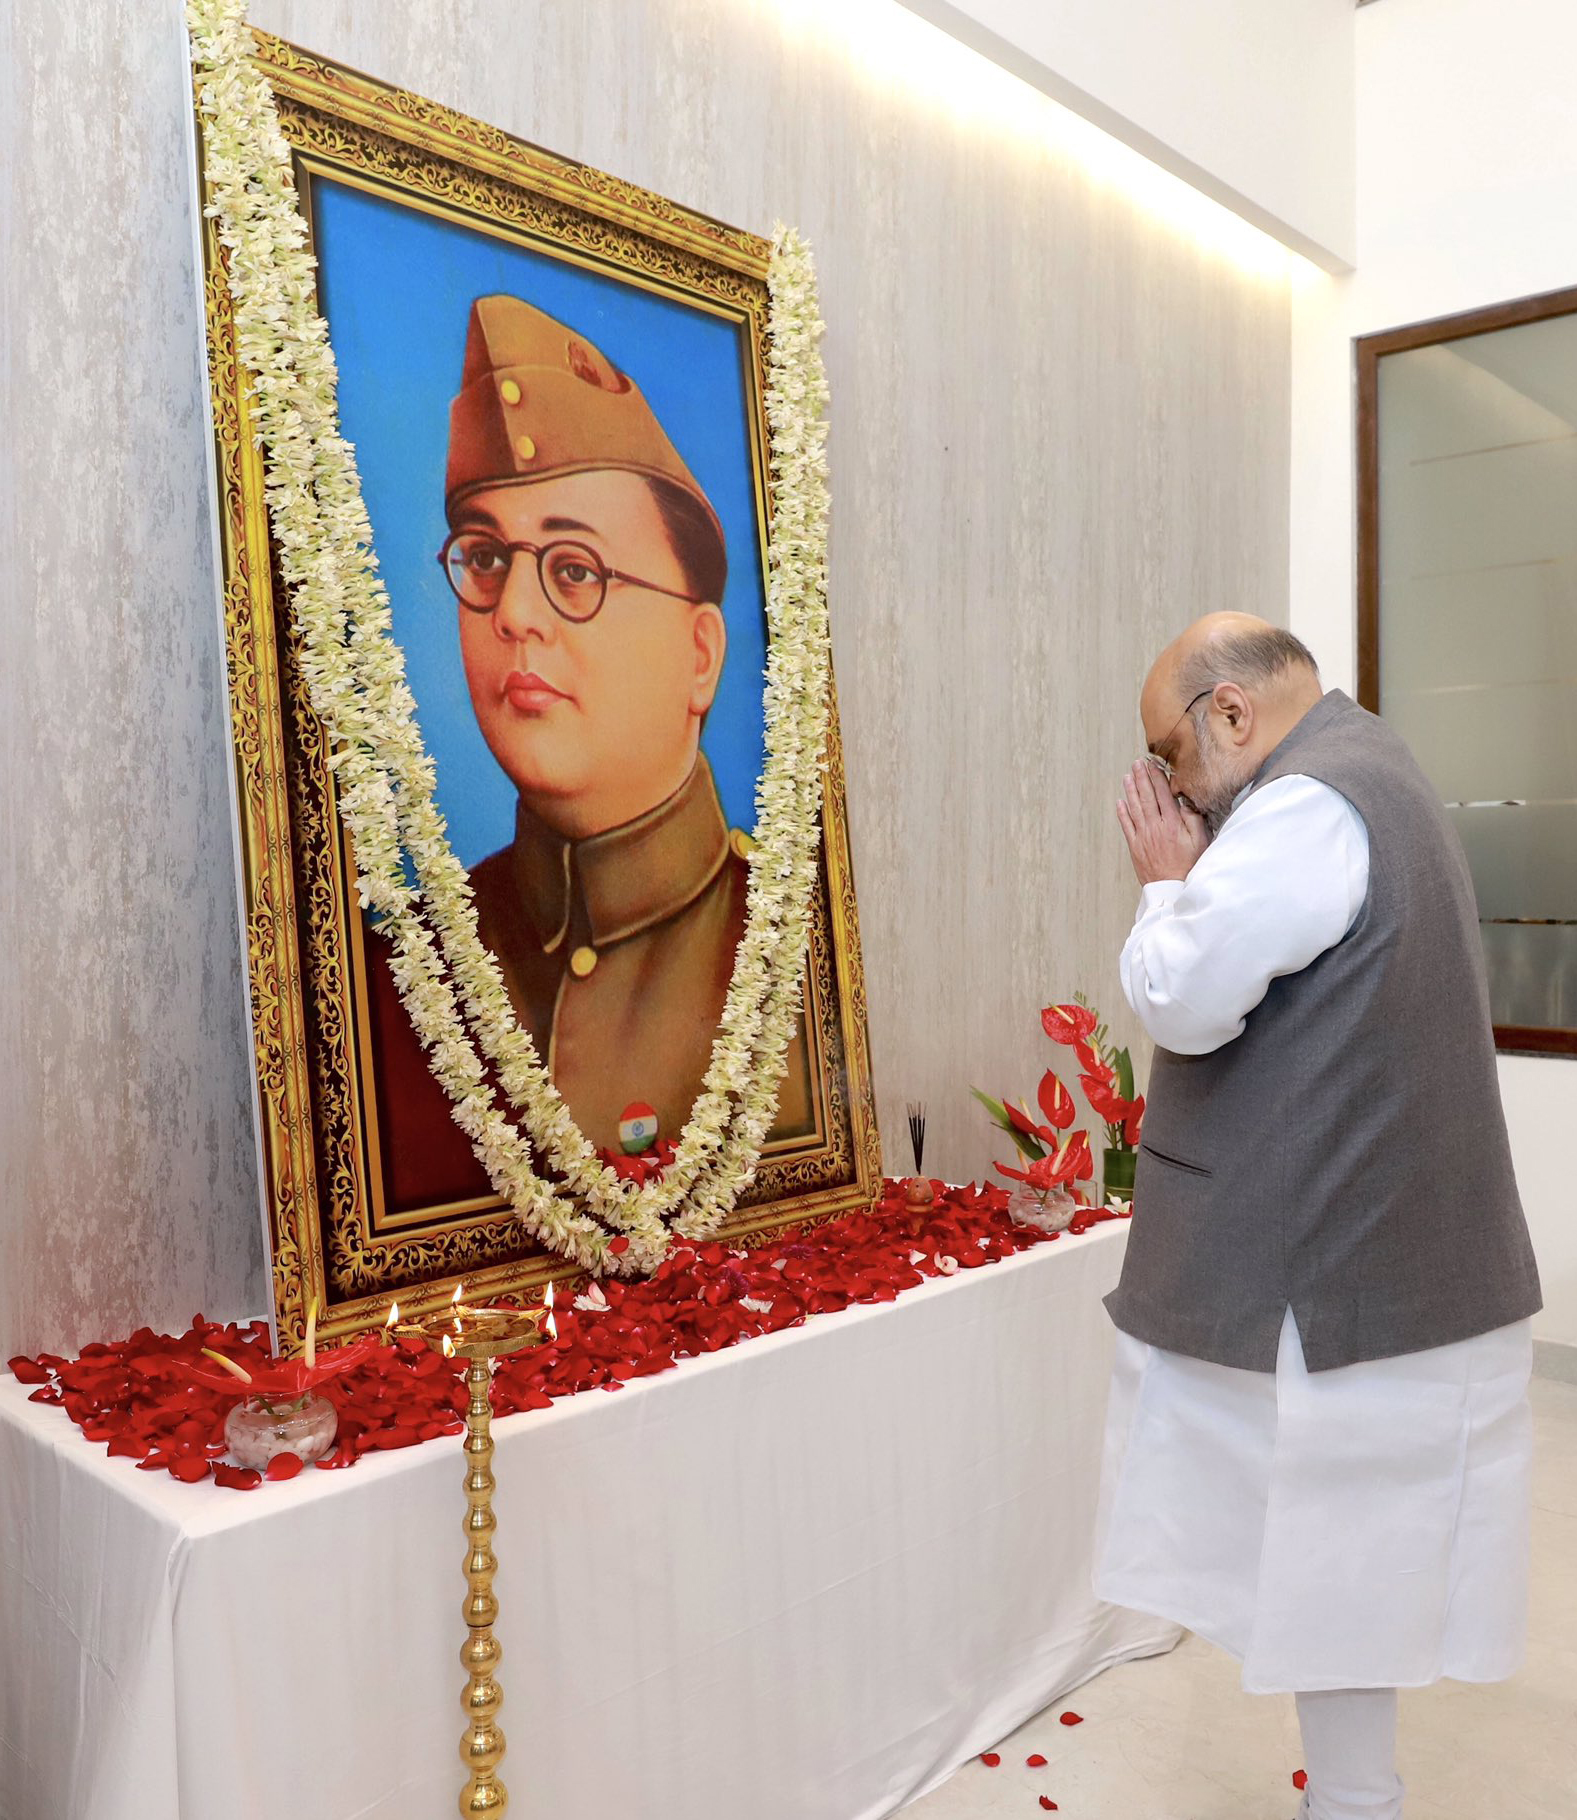 Union Home Minister Amit Shah pays floral tribute to Netaji Subhas Chandra Bose on his 125th birth anniversary, in Guwahati on Saturday